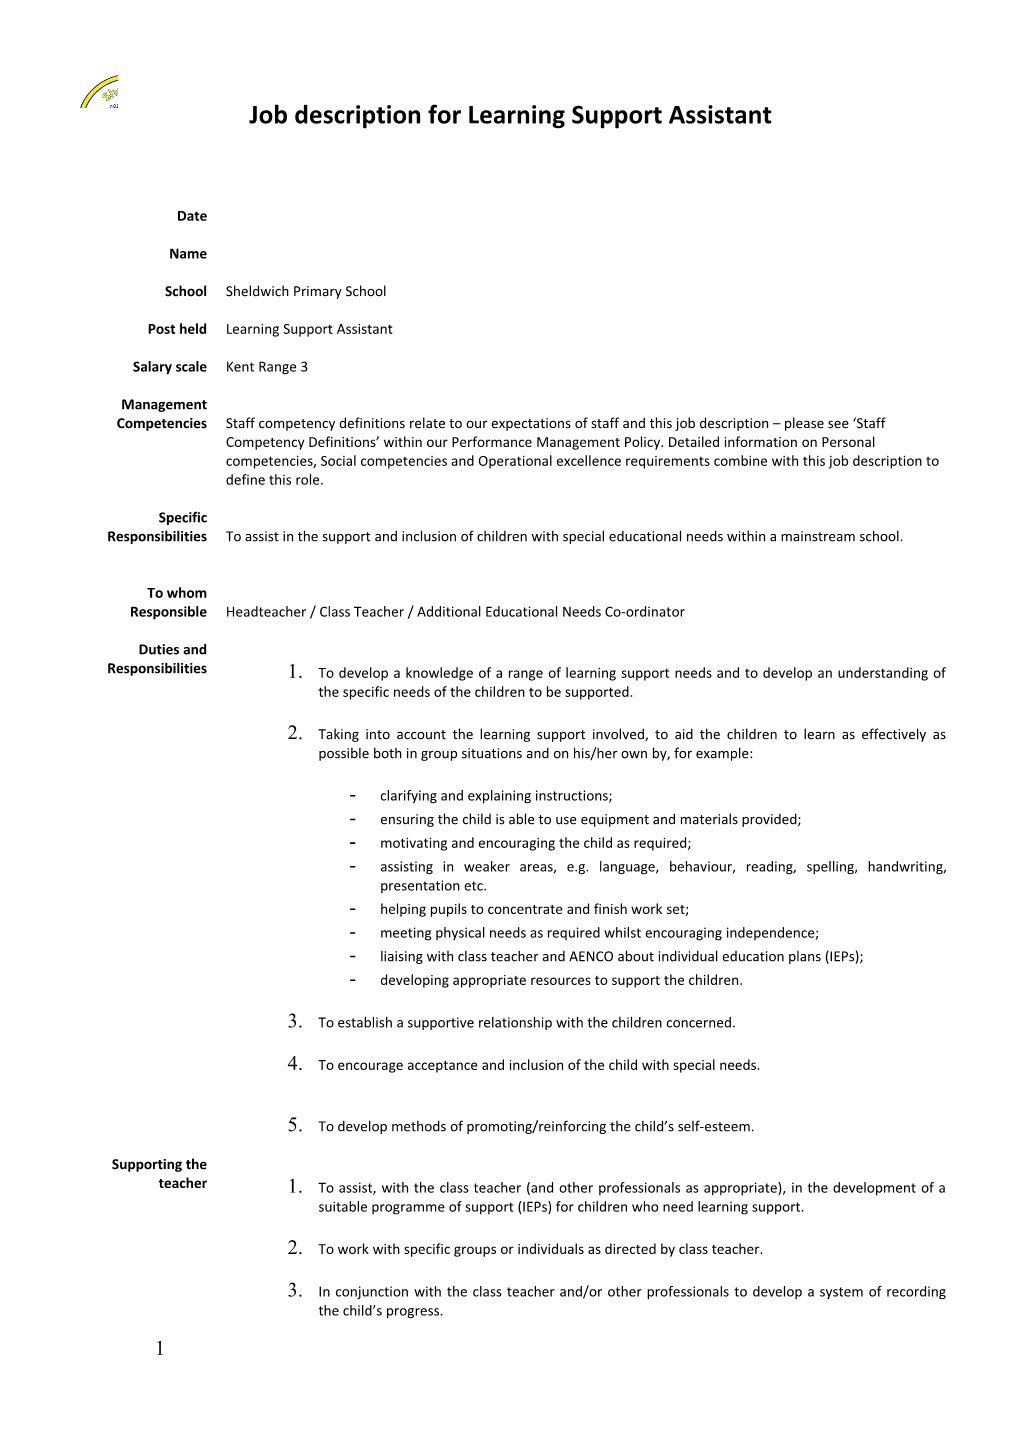 Job Description for Learning Support Assistant